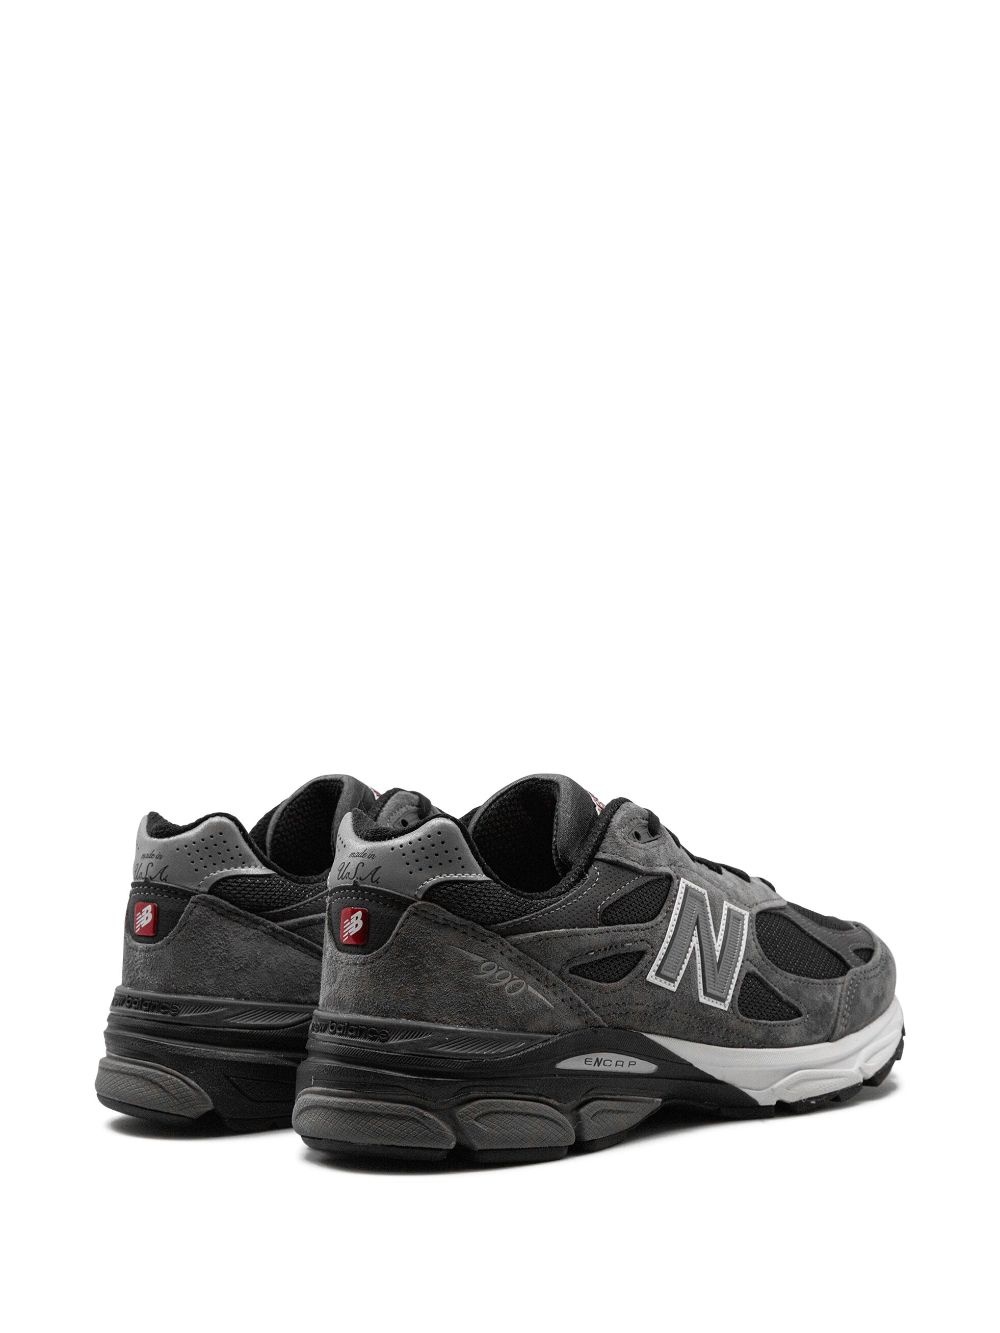 x United Arrows & Sons 990v3 "Grey" sneakers - 3